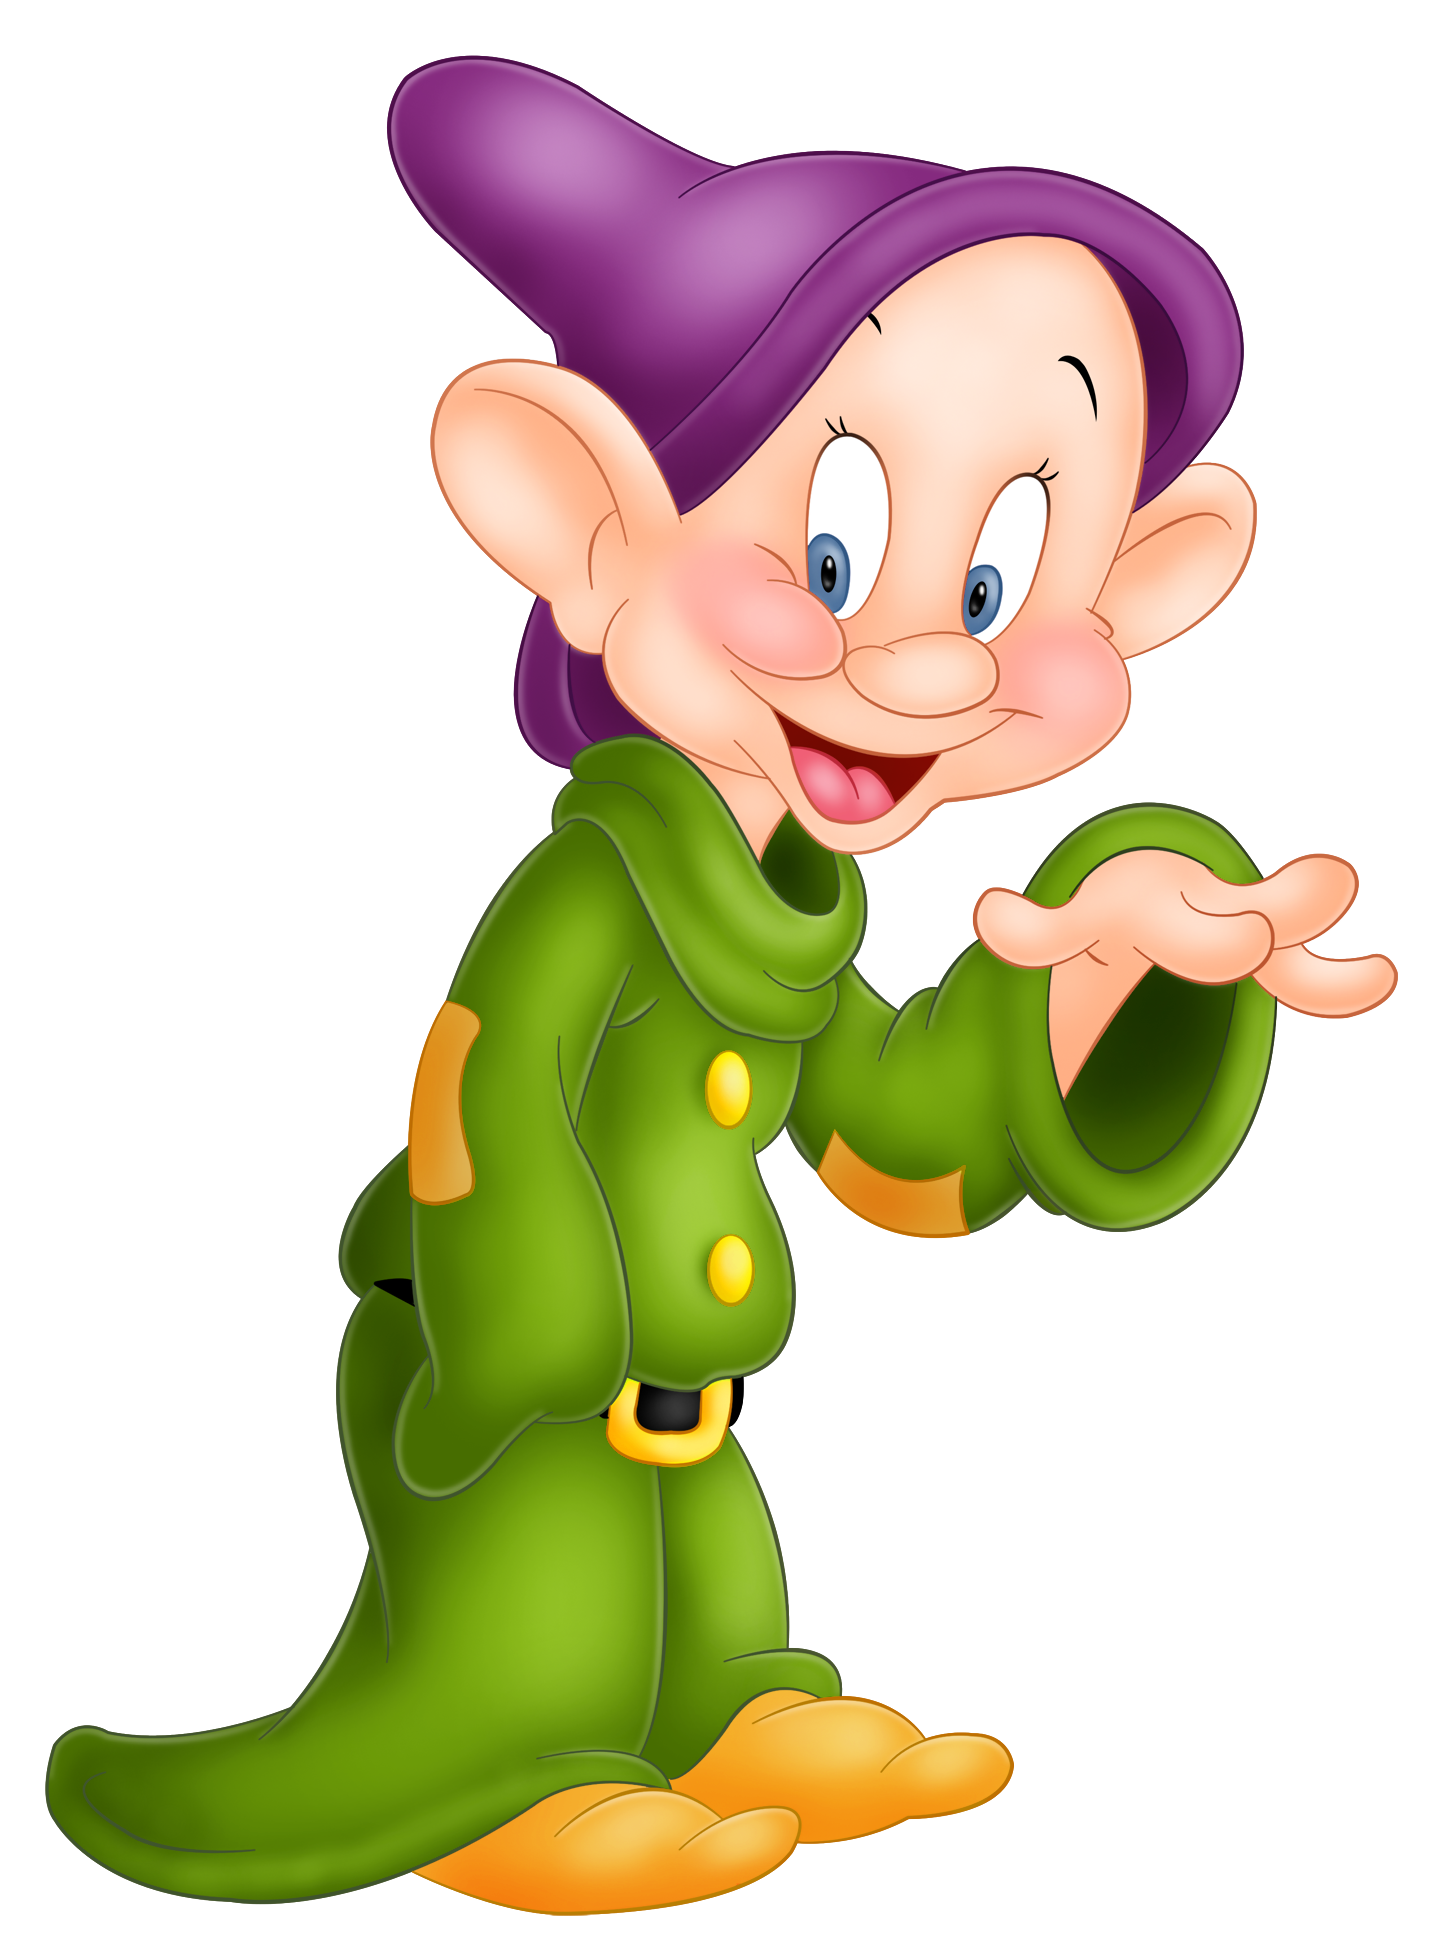 Dopey Snow White Dwarf PNG Image Quality Image And Transparent PNG Free Clipart